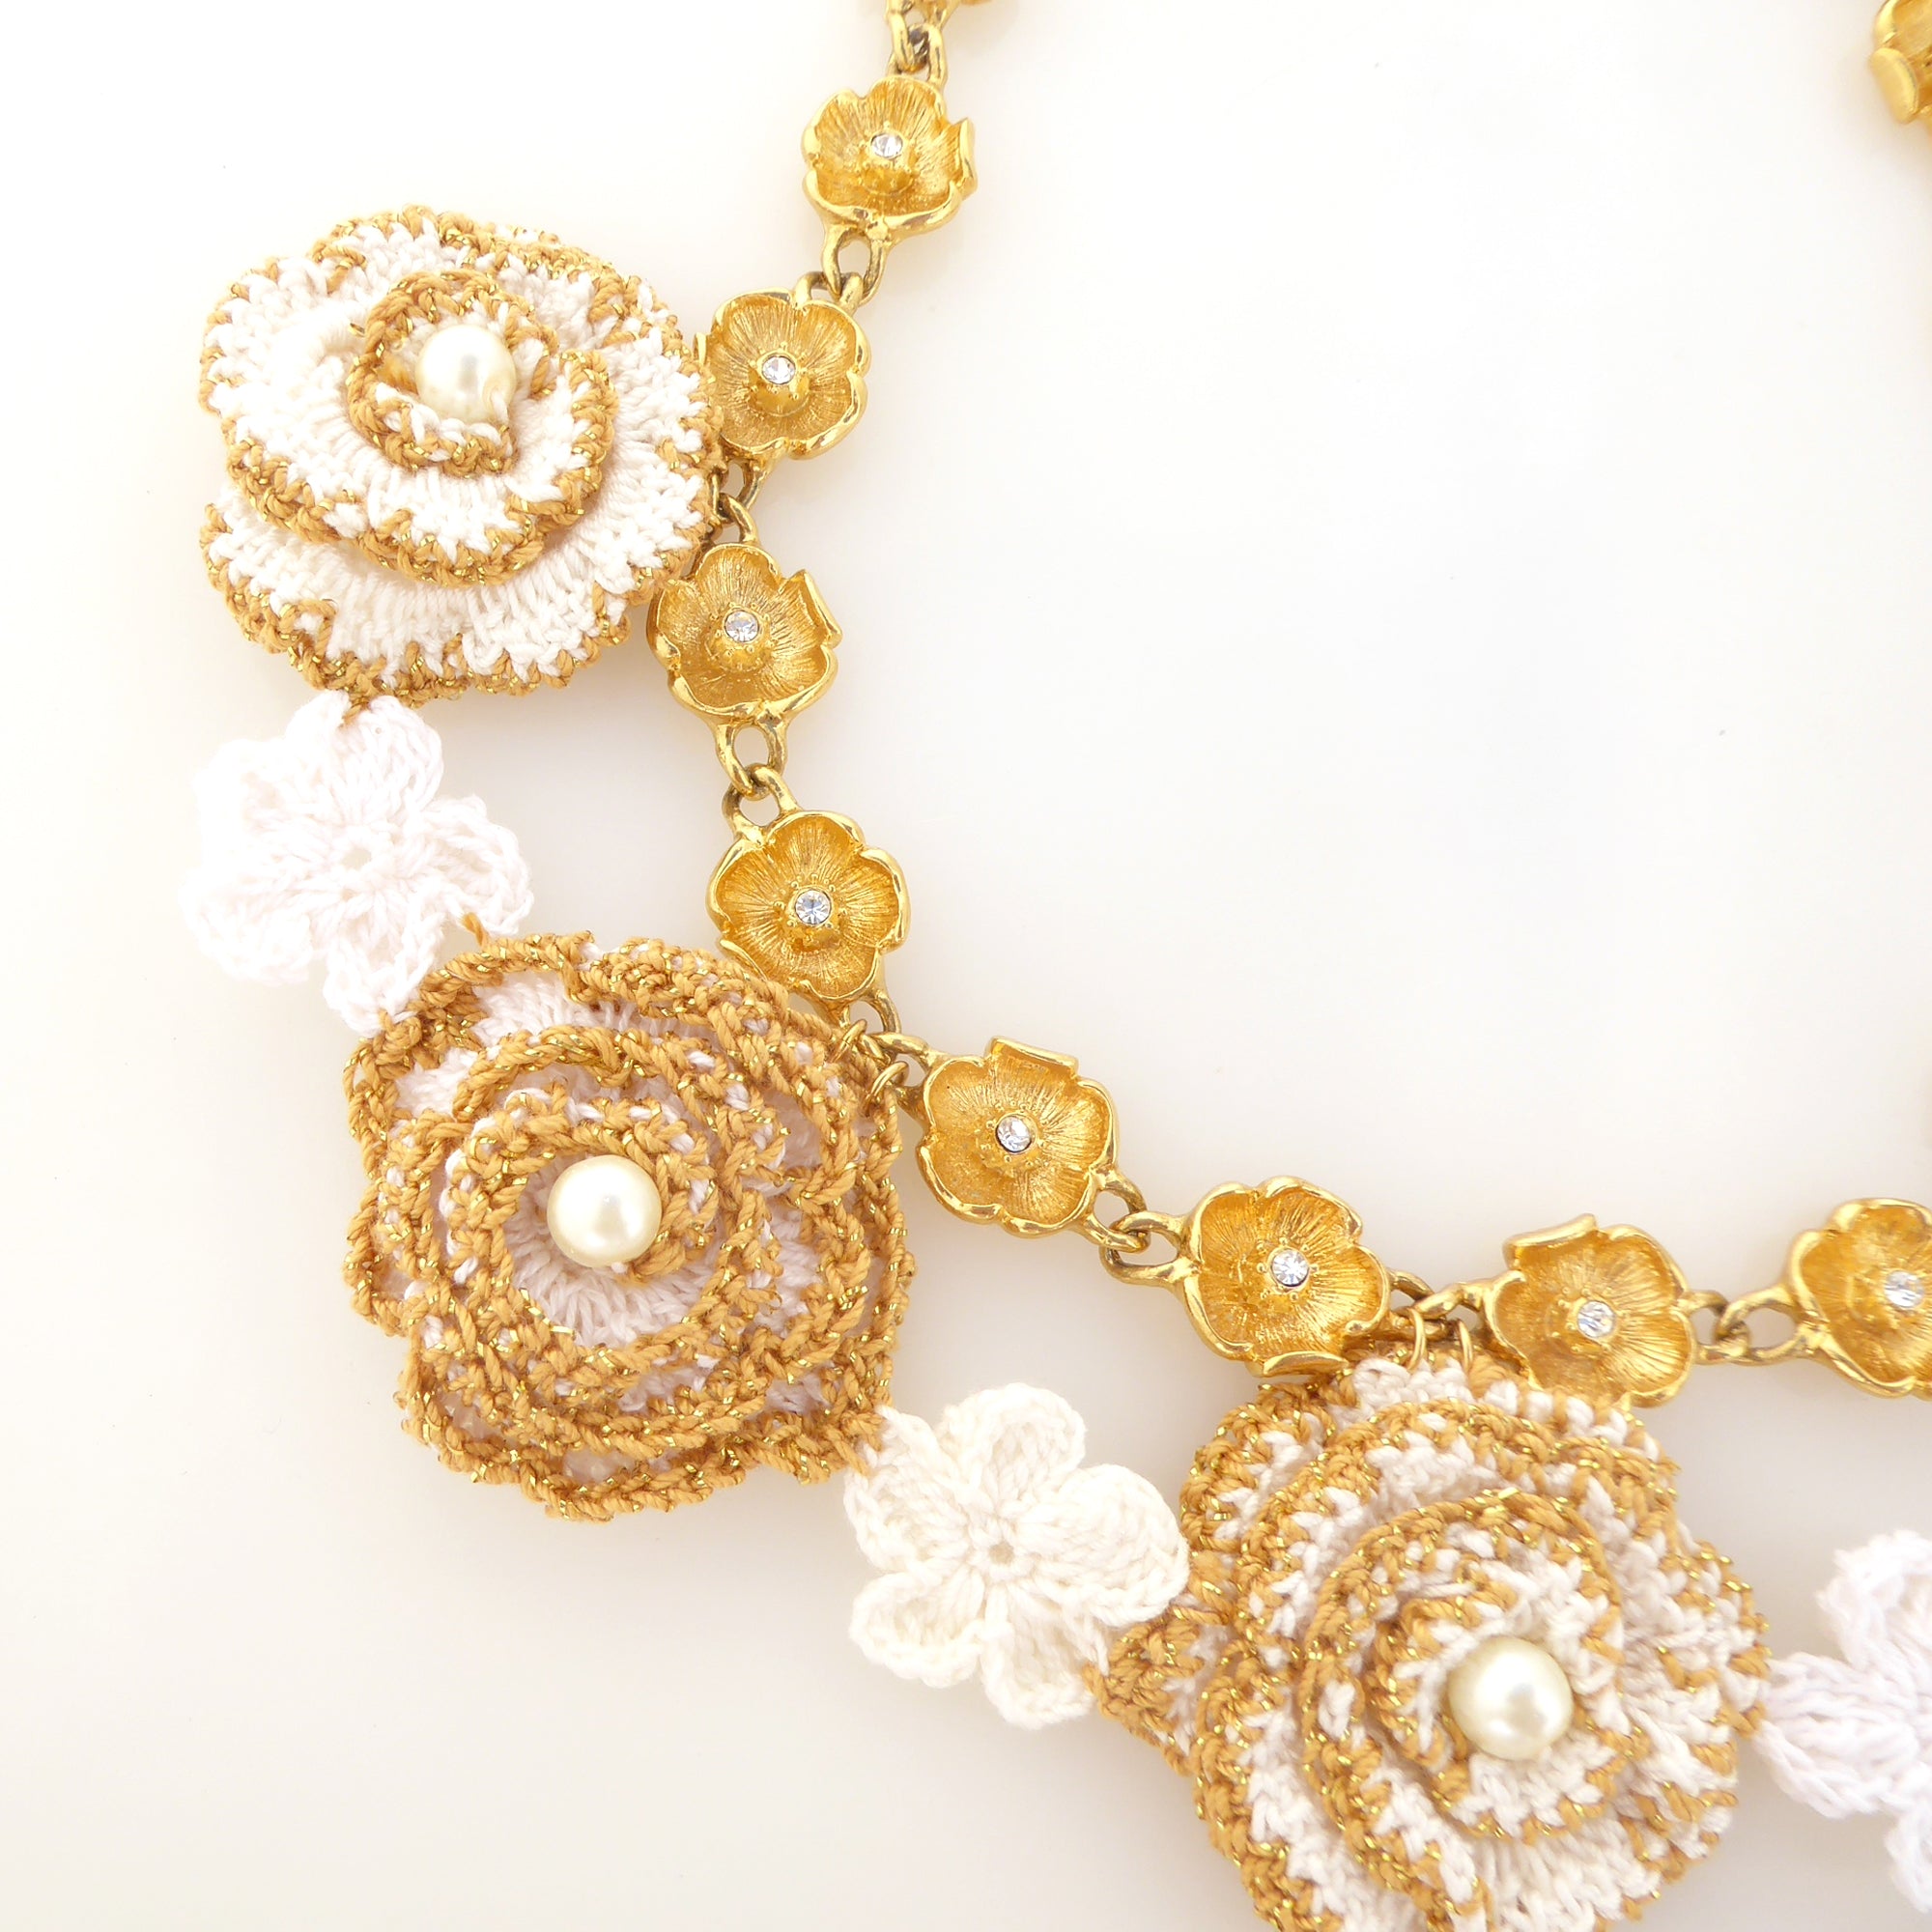 Gold and white crochet flower necklace by Jenny Dayco 5